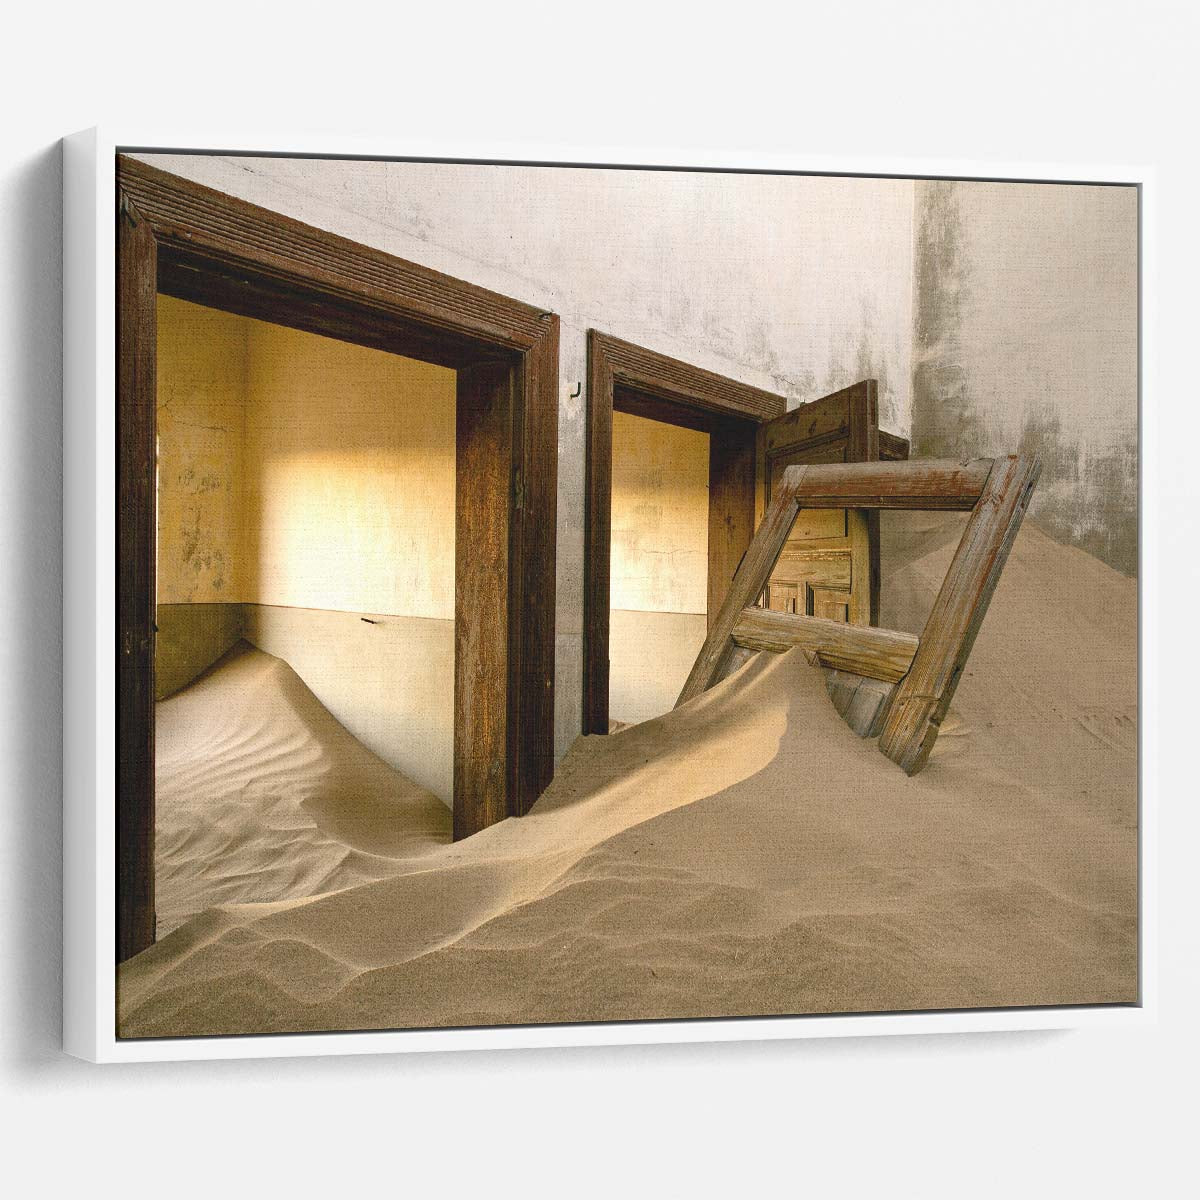 Abandoned Sand Dune House Urbex Wall Art by Luxuriance Designs. Made in USA.